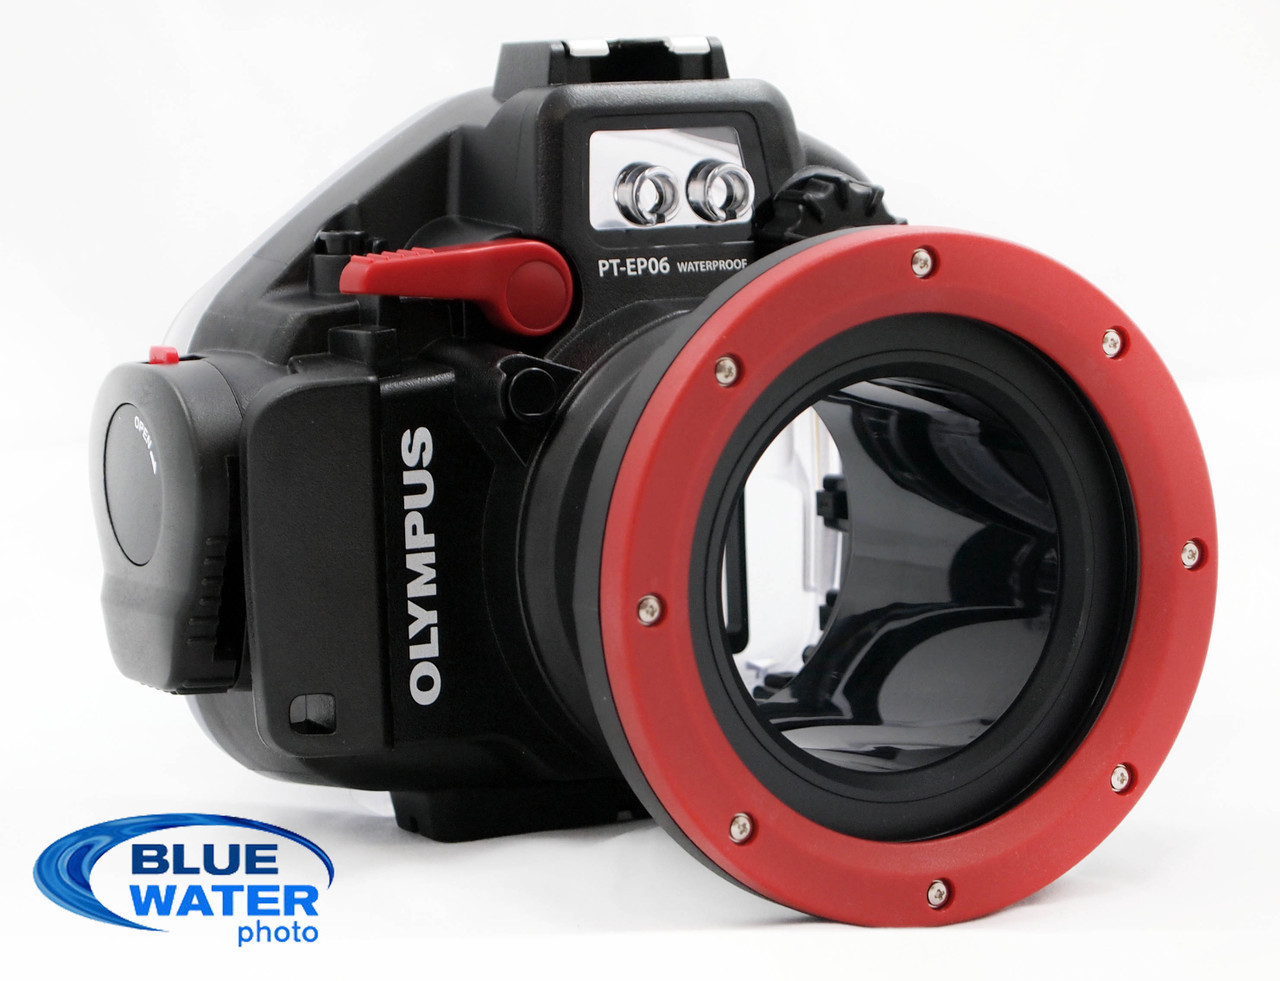 Olympus E-PM1 underwater housing PT-EP06 (Discontinued)